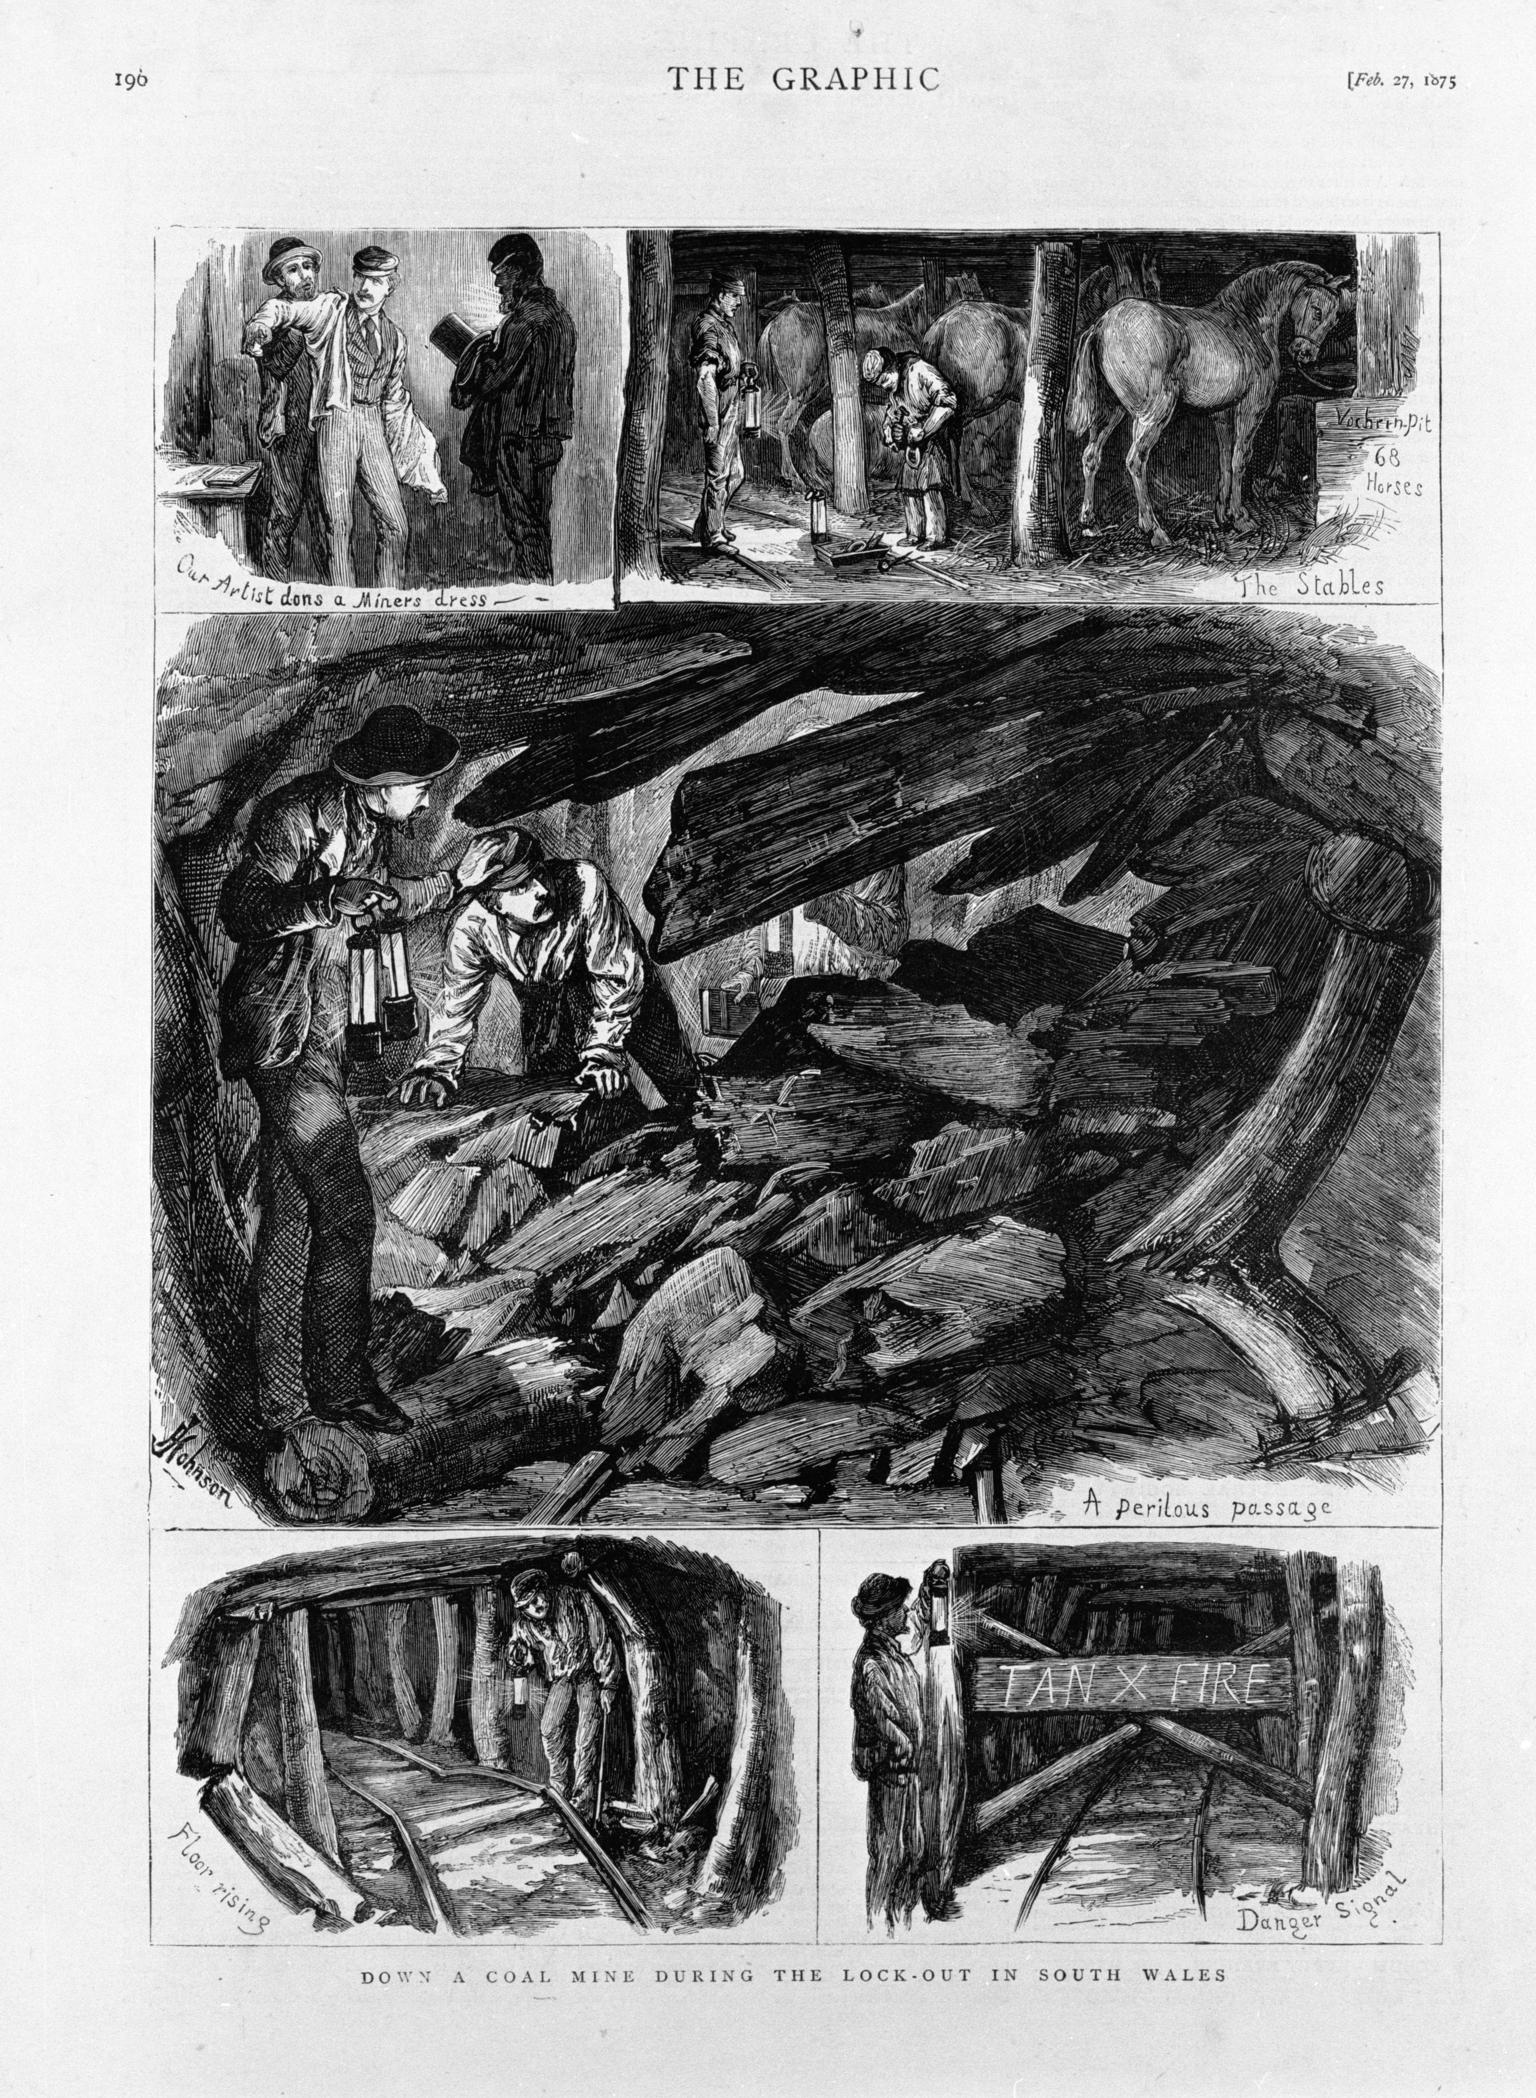 Down a Coal Mine During the Lock-Out in South Wales (print)